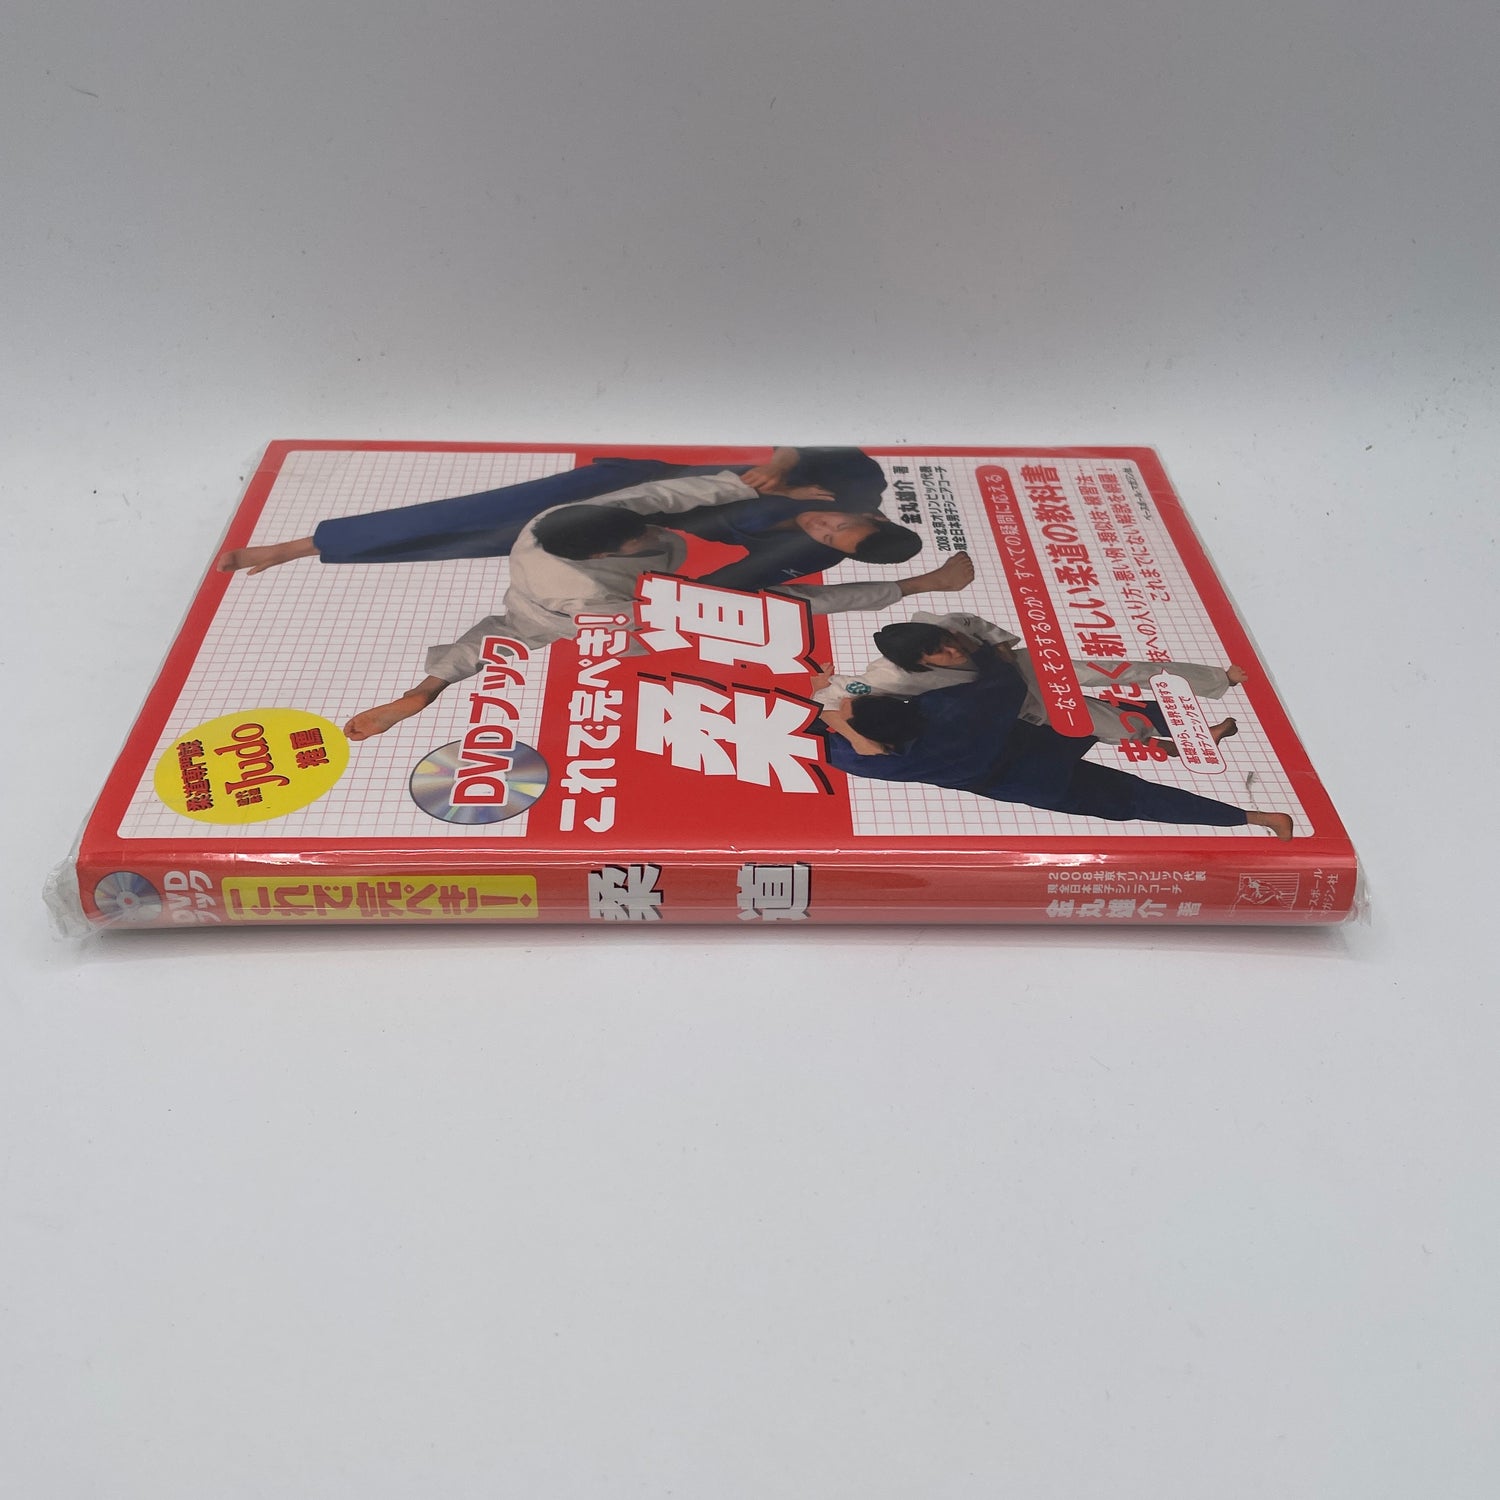 This is Perfect Judo Book & DVD by Yusuke Kanemaru (Preowned)